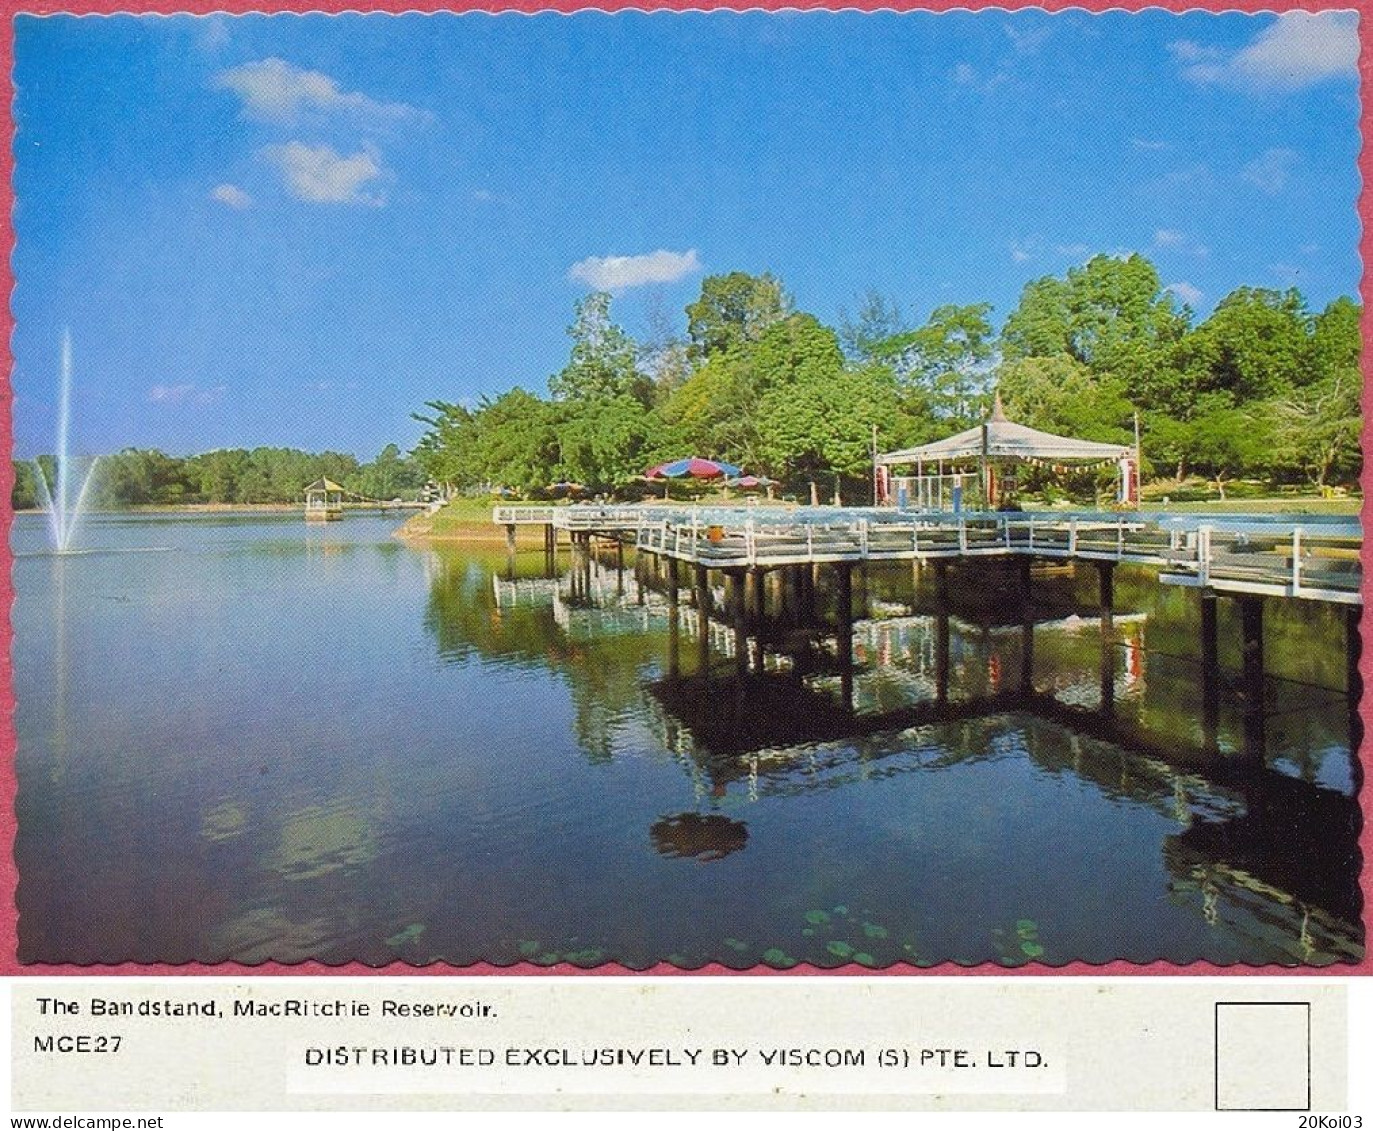 Singapore The Bandstand, MacRitchie Reservoir, 1978's MCE27 DISTRIBUTED EXCLUSIVELY BY VISCOM (S) PTE. LTD._cpc - Singapour